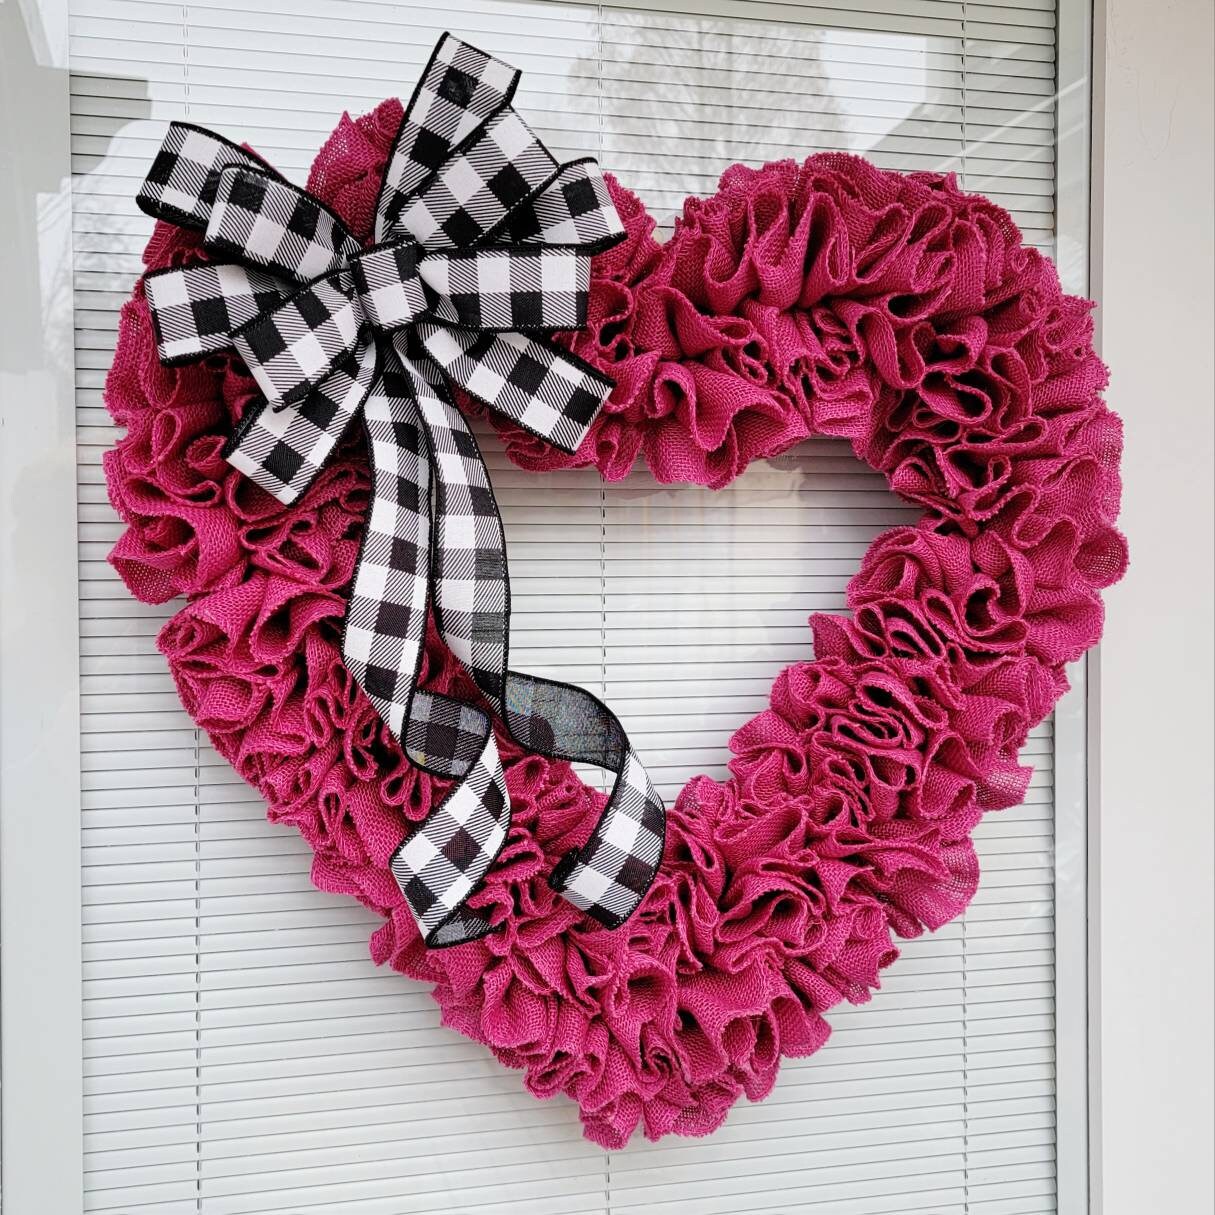 Pink Heart Shaped Burlap Wreath with Bow